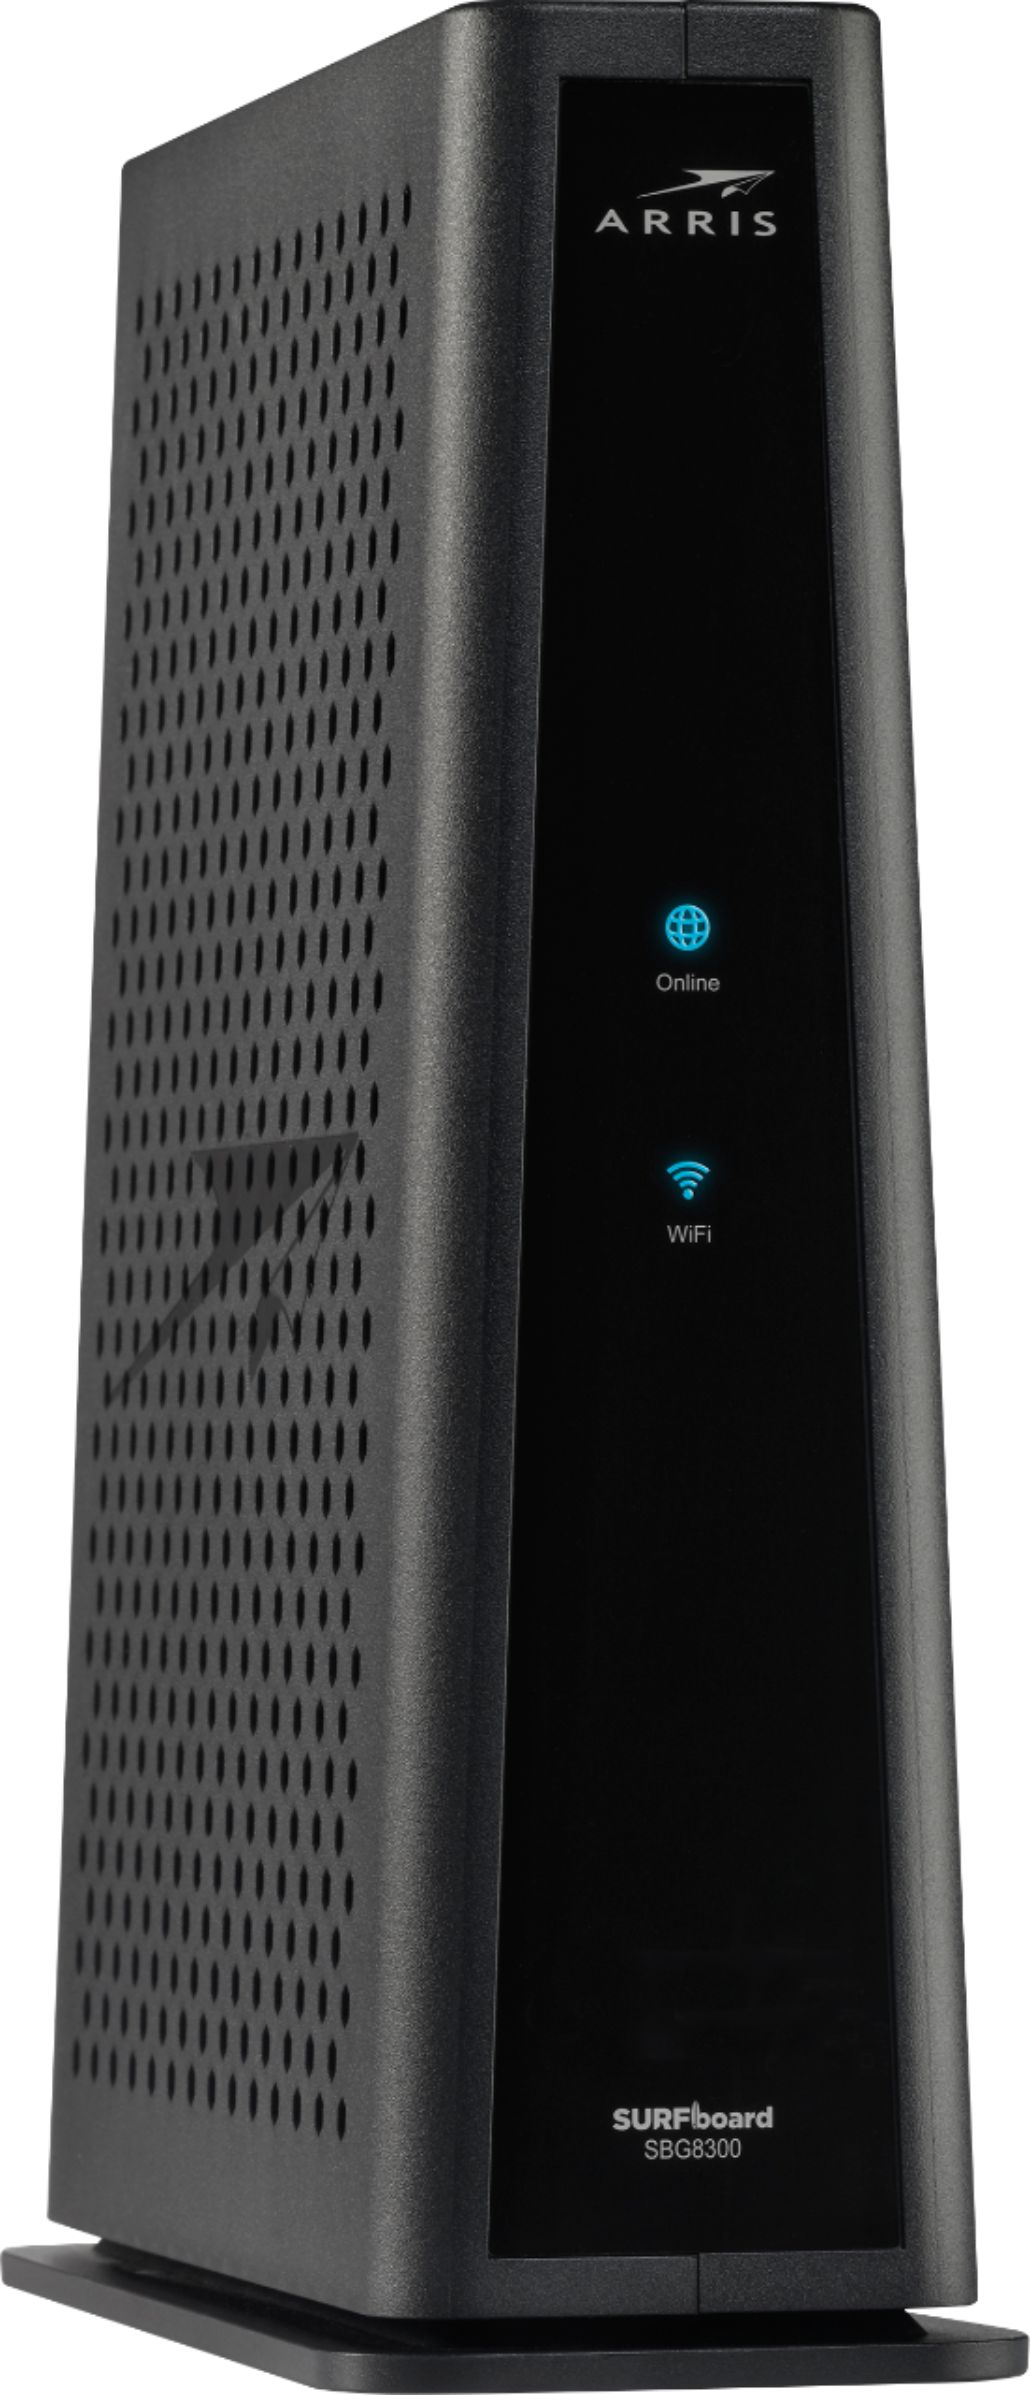 Left View: ARRIS - SURFboard DOCSIS 3.1 Cable Modem & Dual-Band Wi-Fi Router for Xfinity and Cox service tiers - Black